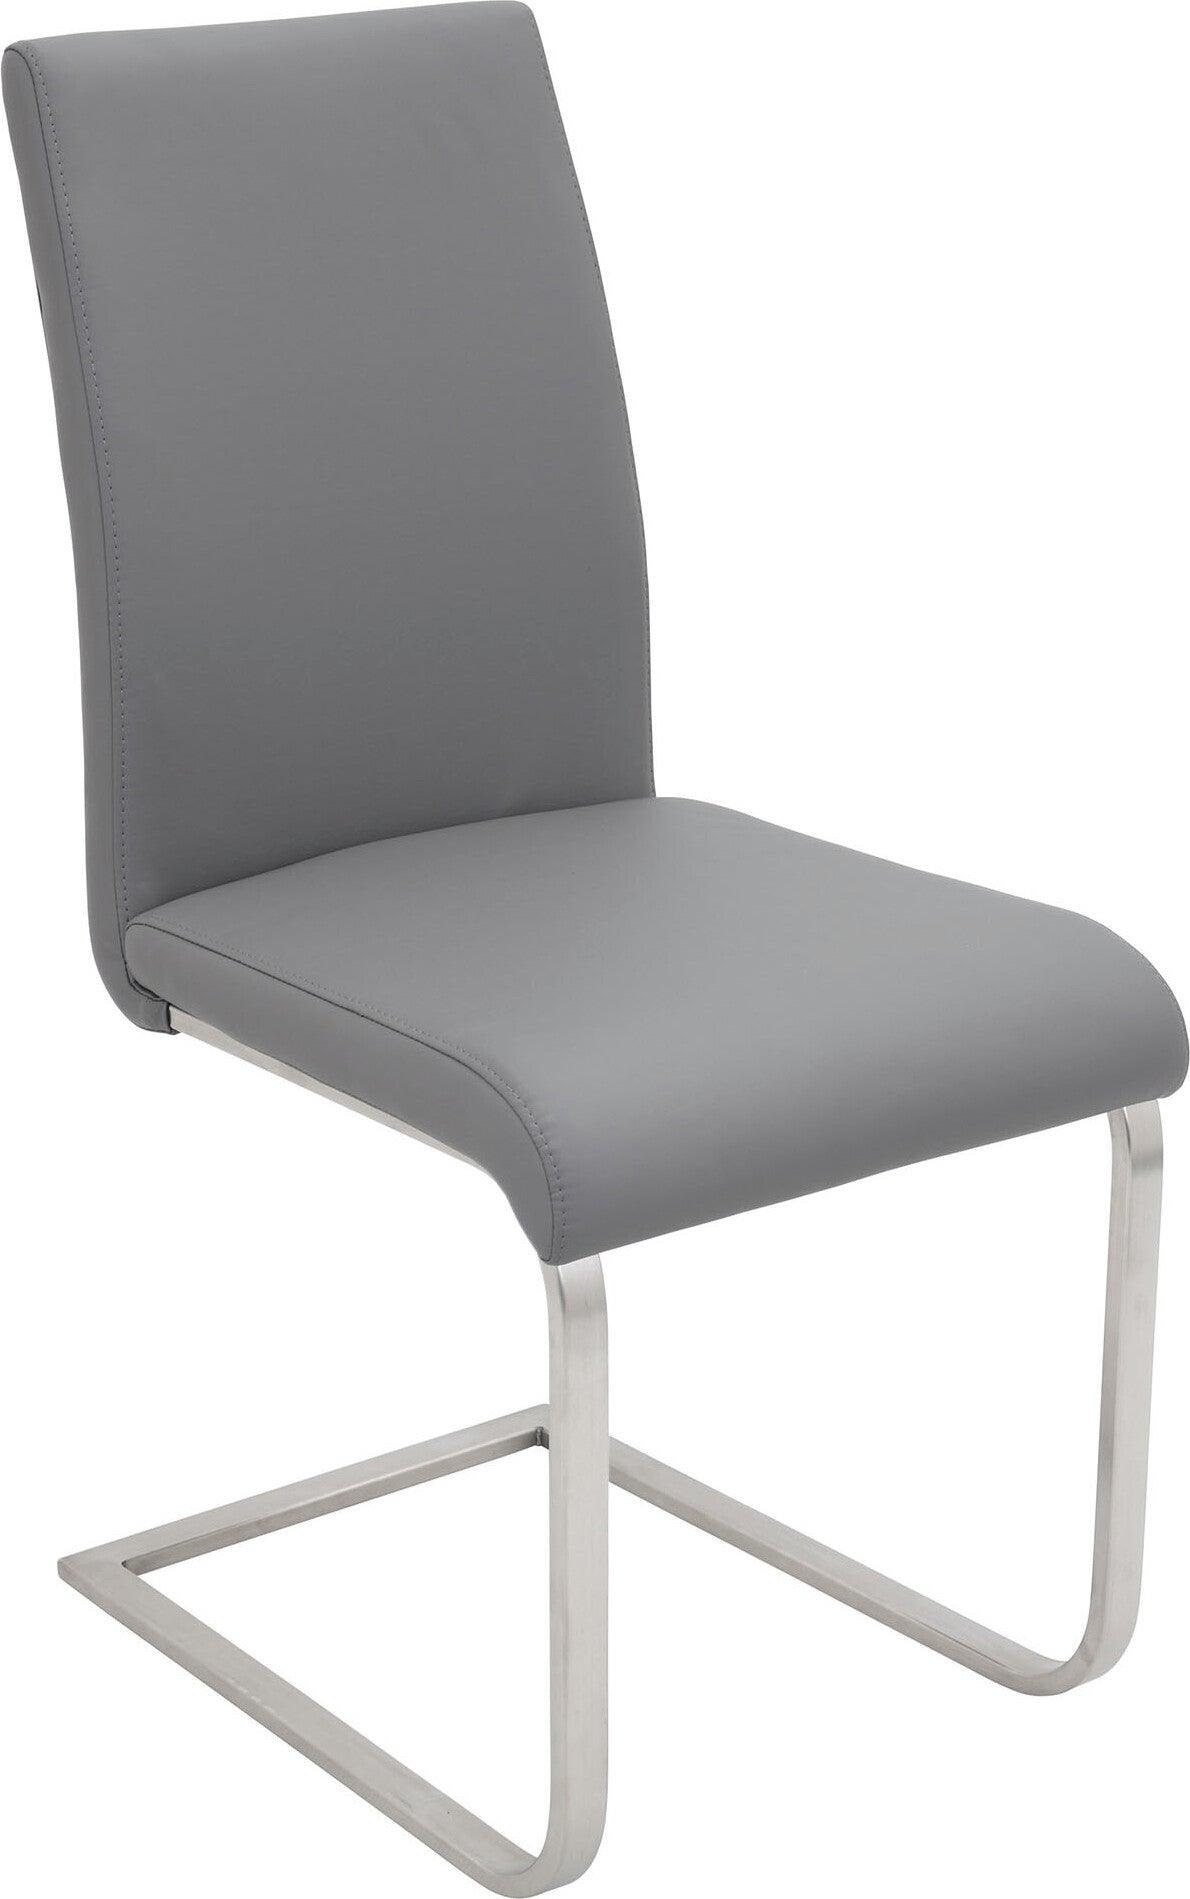 Lumisource Dining Chairs - Foster Contemporary Dining Chair in Grey Faux Leather (Set of 2)